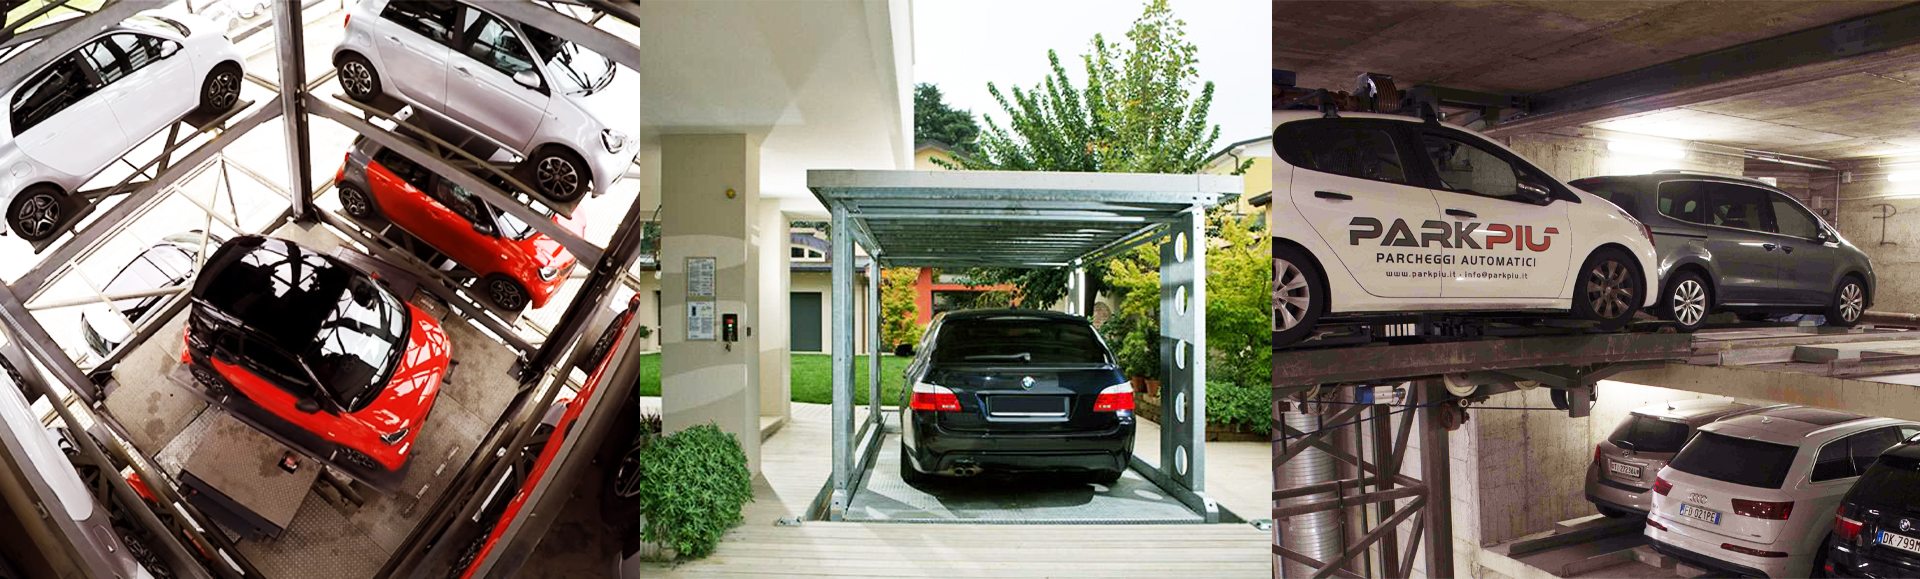 Car lifts: discover our innovative solutions